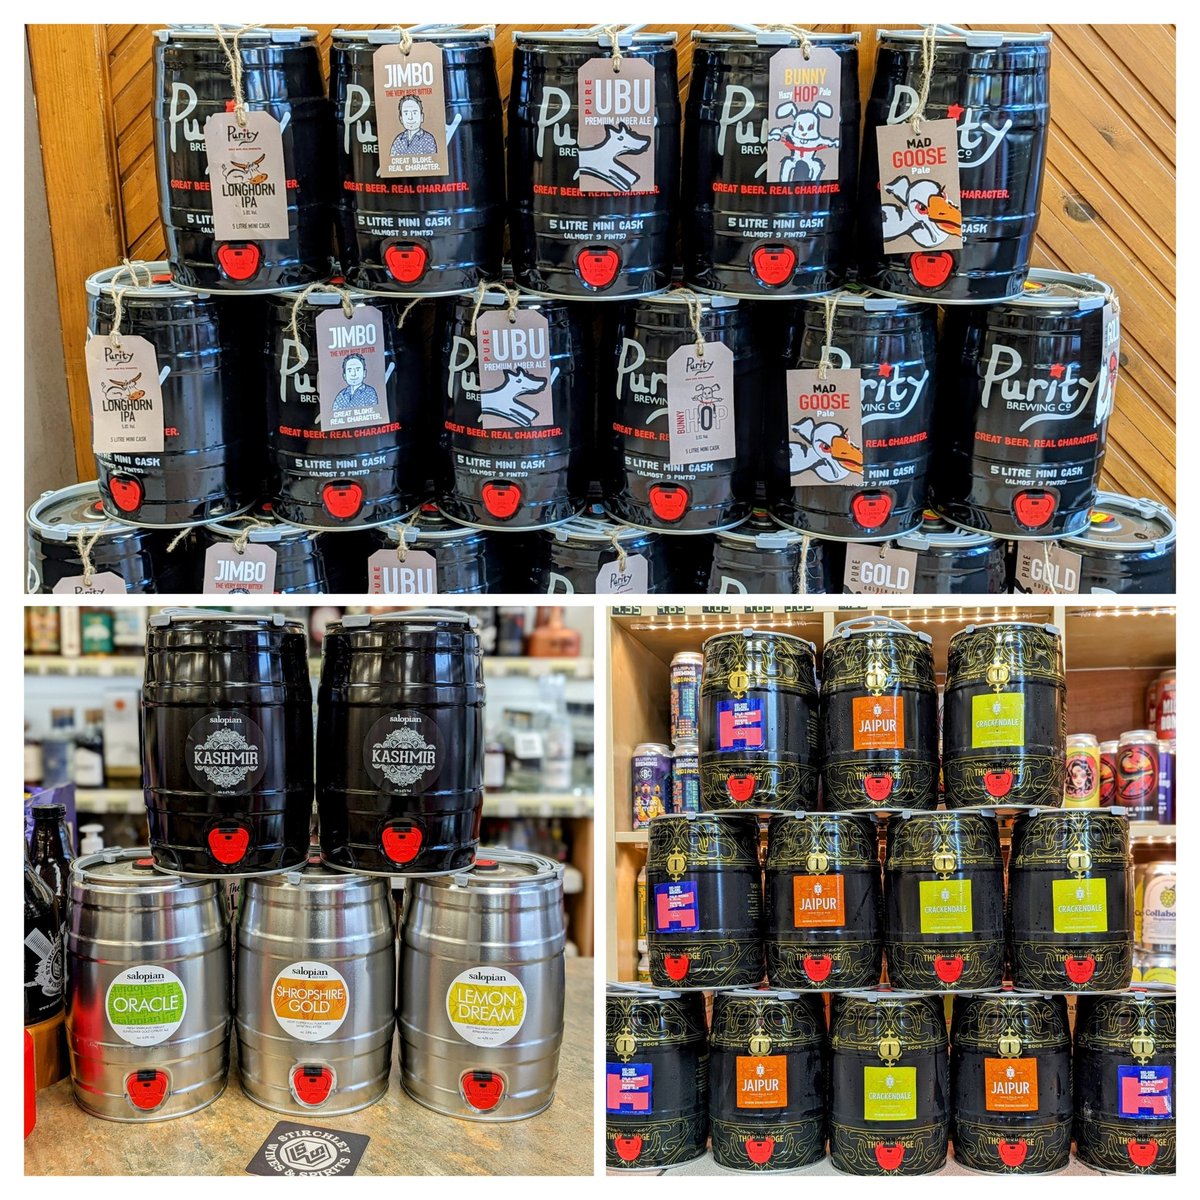 Last chance to pick up your mini keg in time for Christmas Day!

Beers from @thornbridge @PurityBrewingCo @SalopianBrewery and @KelhamBrewery still available.

Be quick, they won't be around for much longer!

#VivaStirchley #VivaBrum #ShopIndependent #SWSXmas🎄